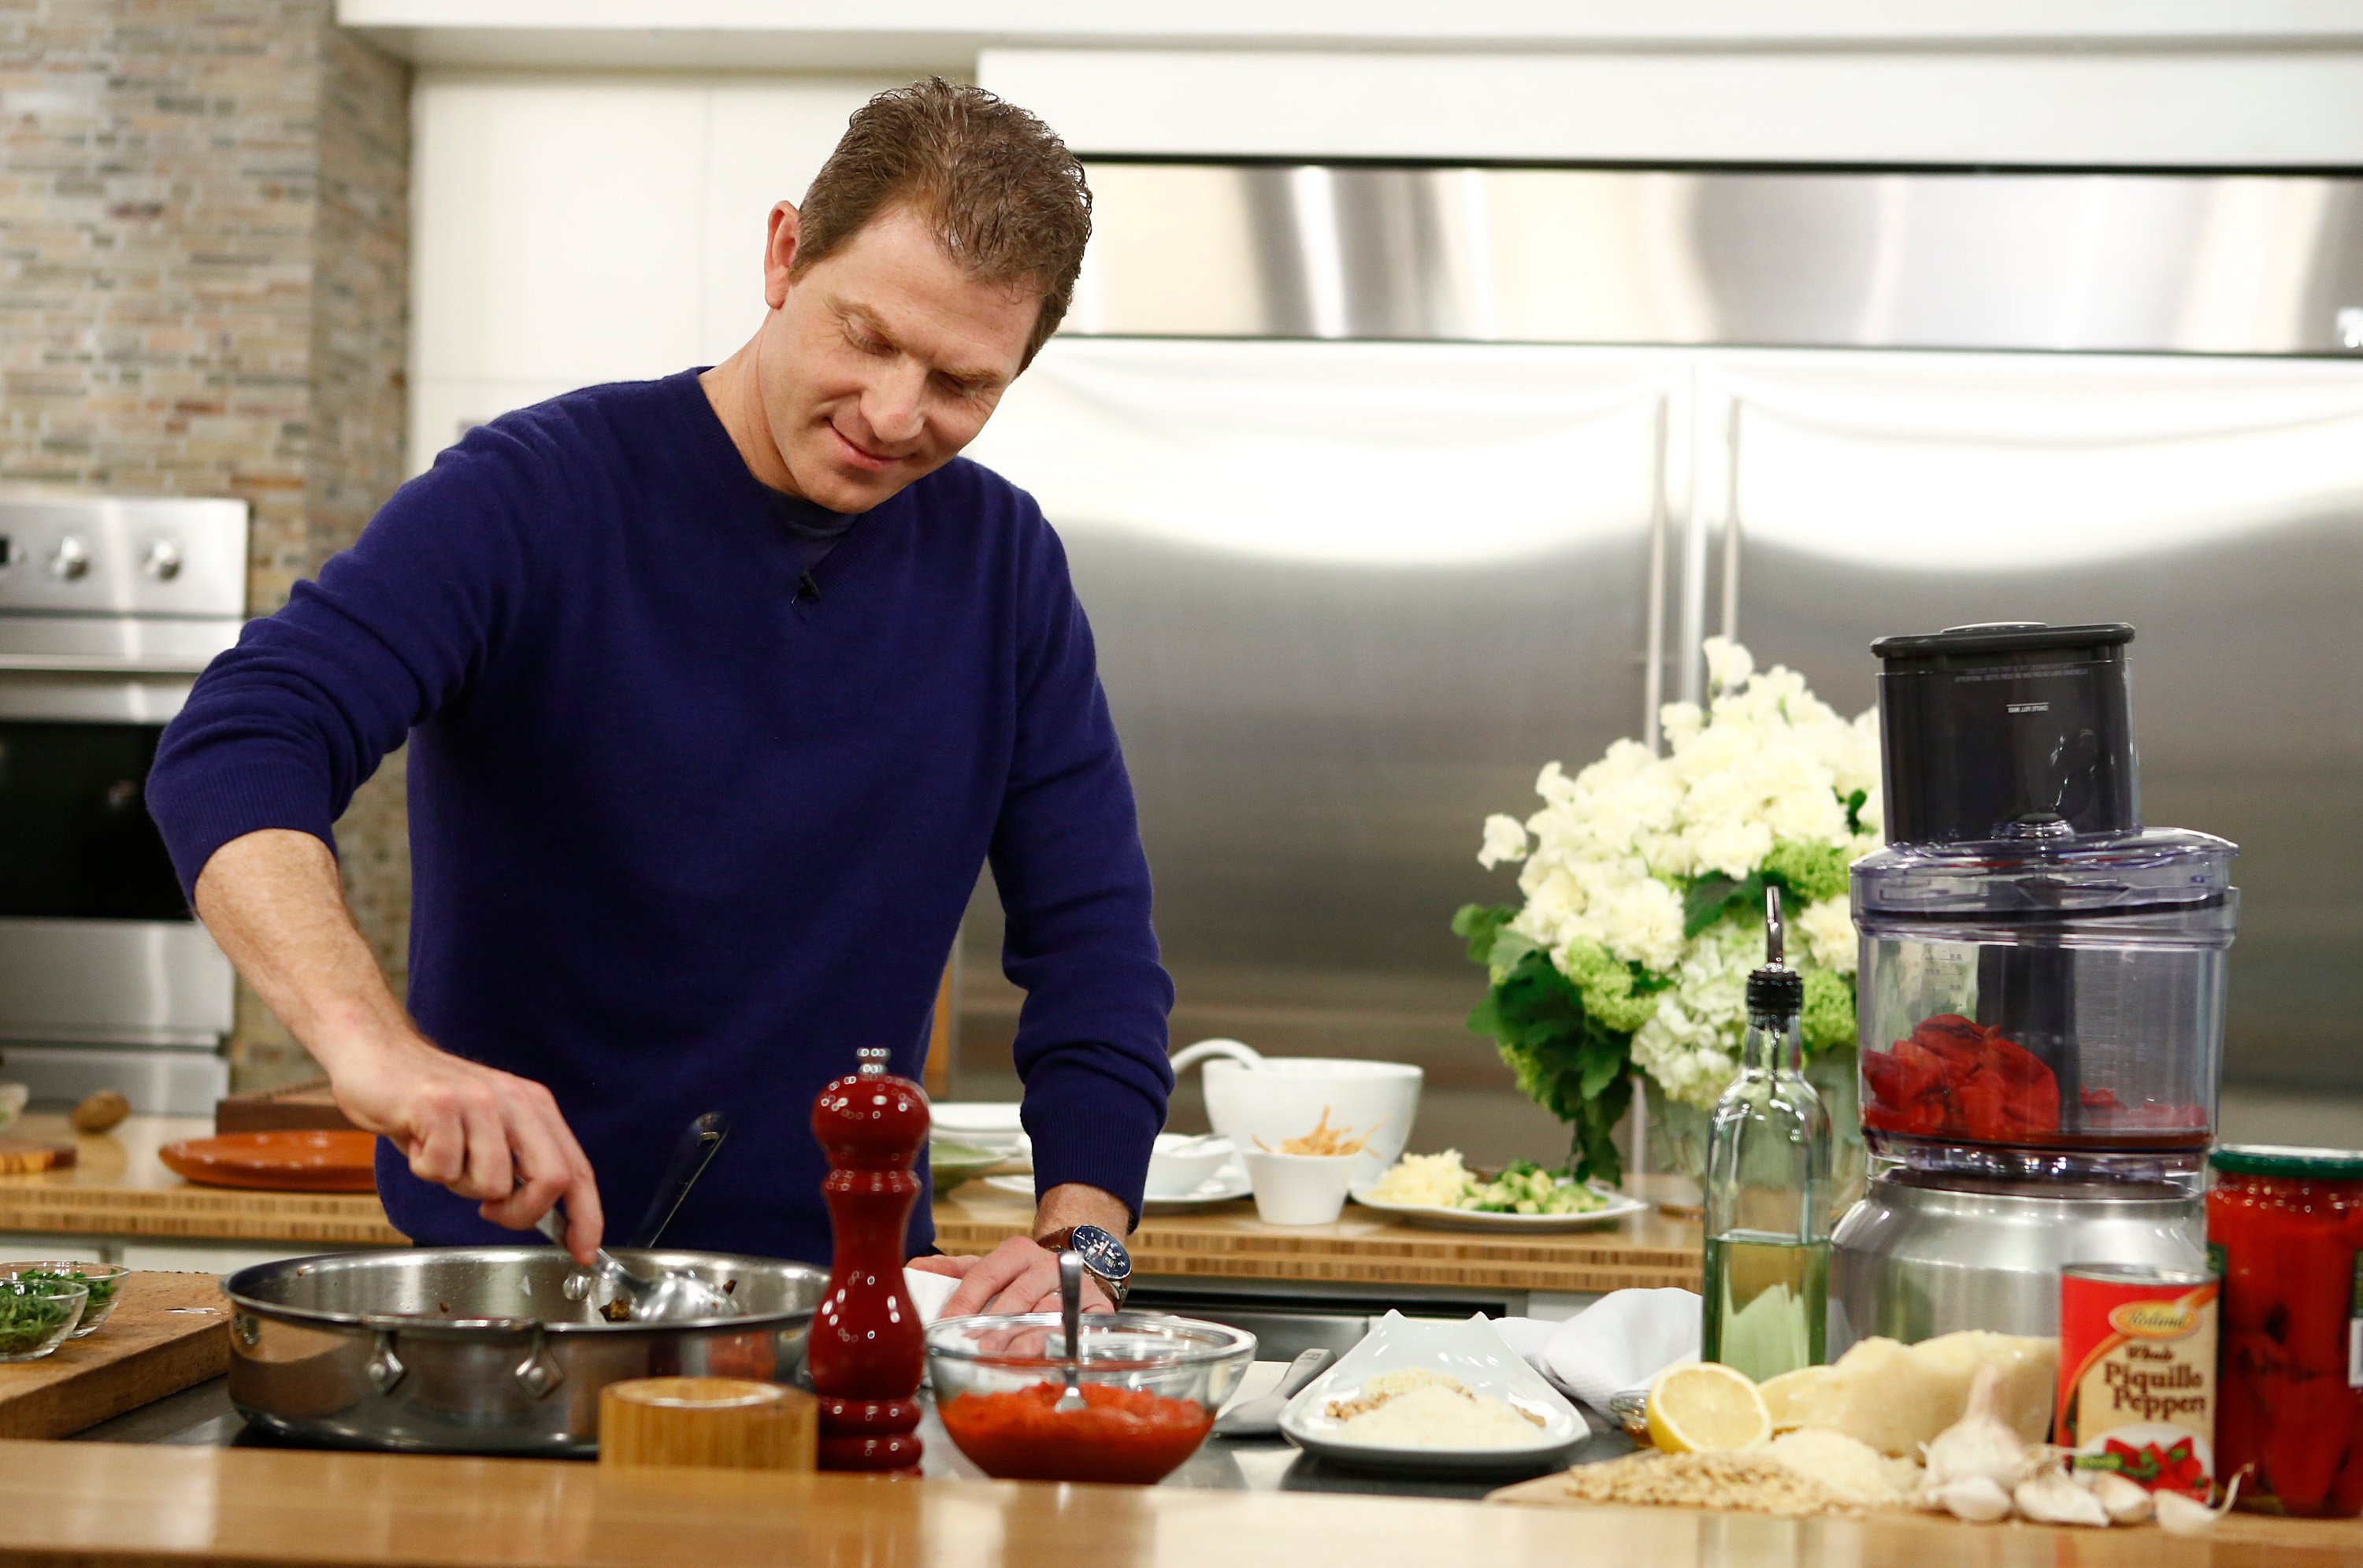 Celebrity chef Bobby Flay wears a blue shirt as he prepares a meal in this photograph.